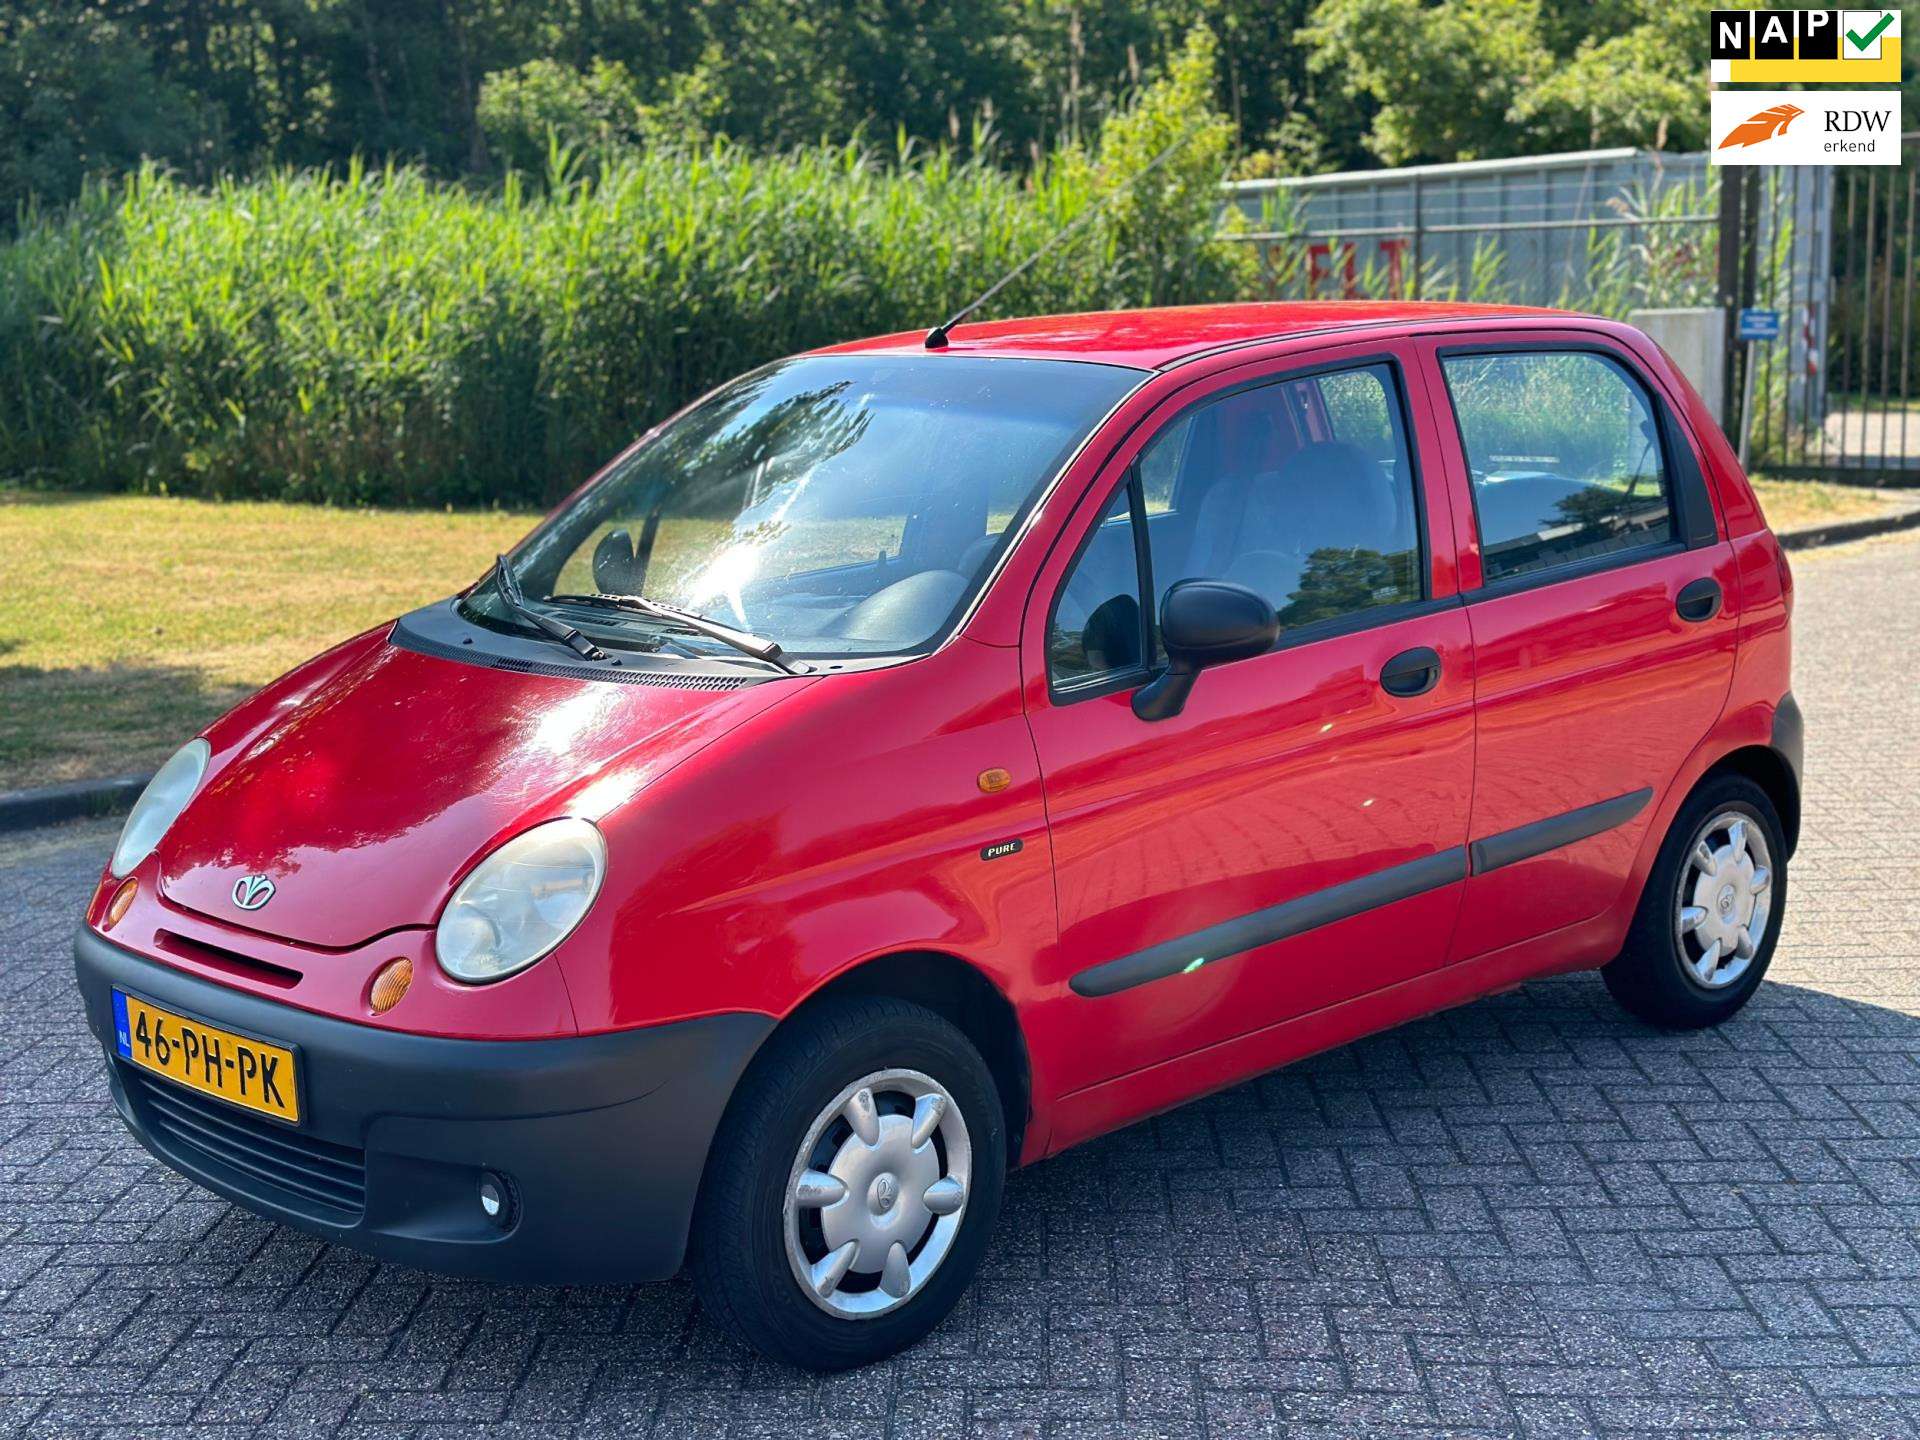 Daewoo Matiz Compact in Red used in LELYSTAD for € 999.-